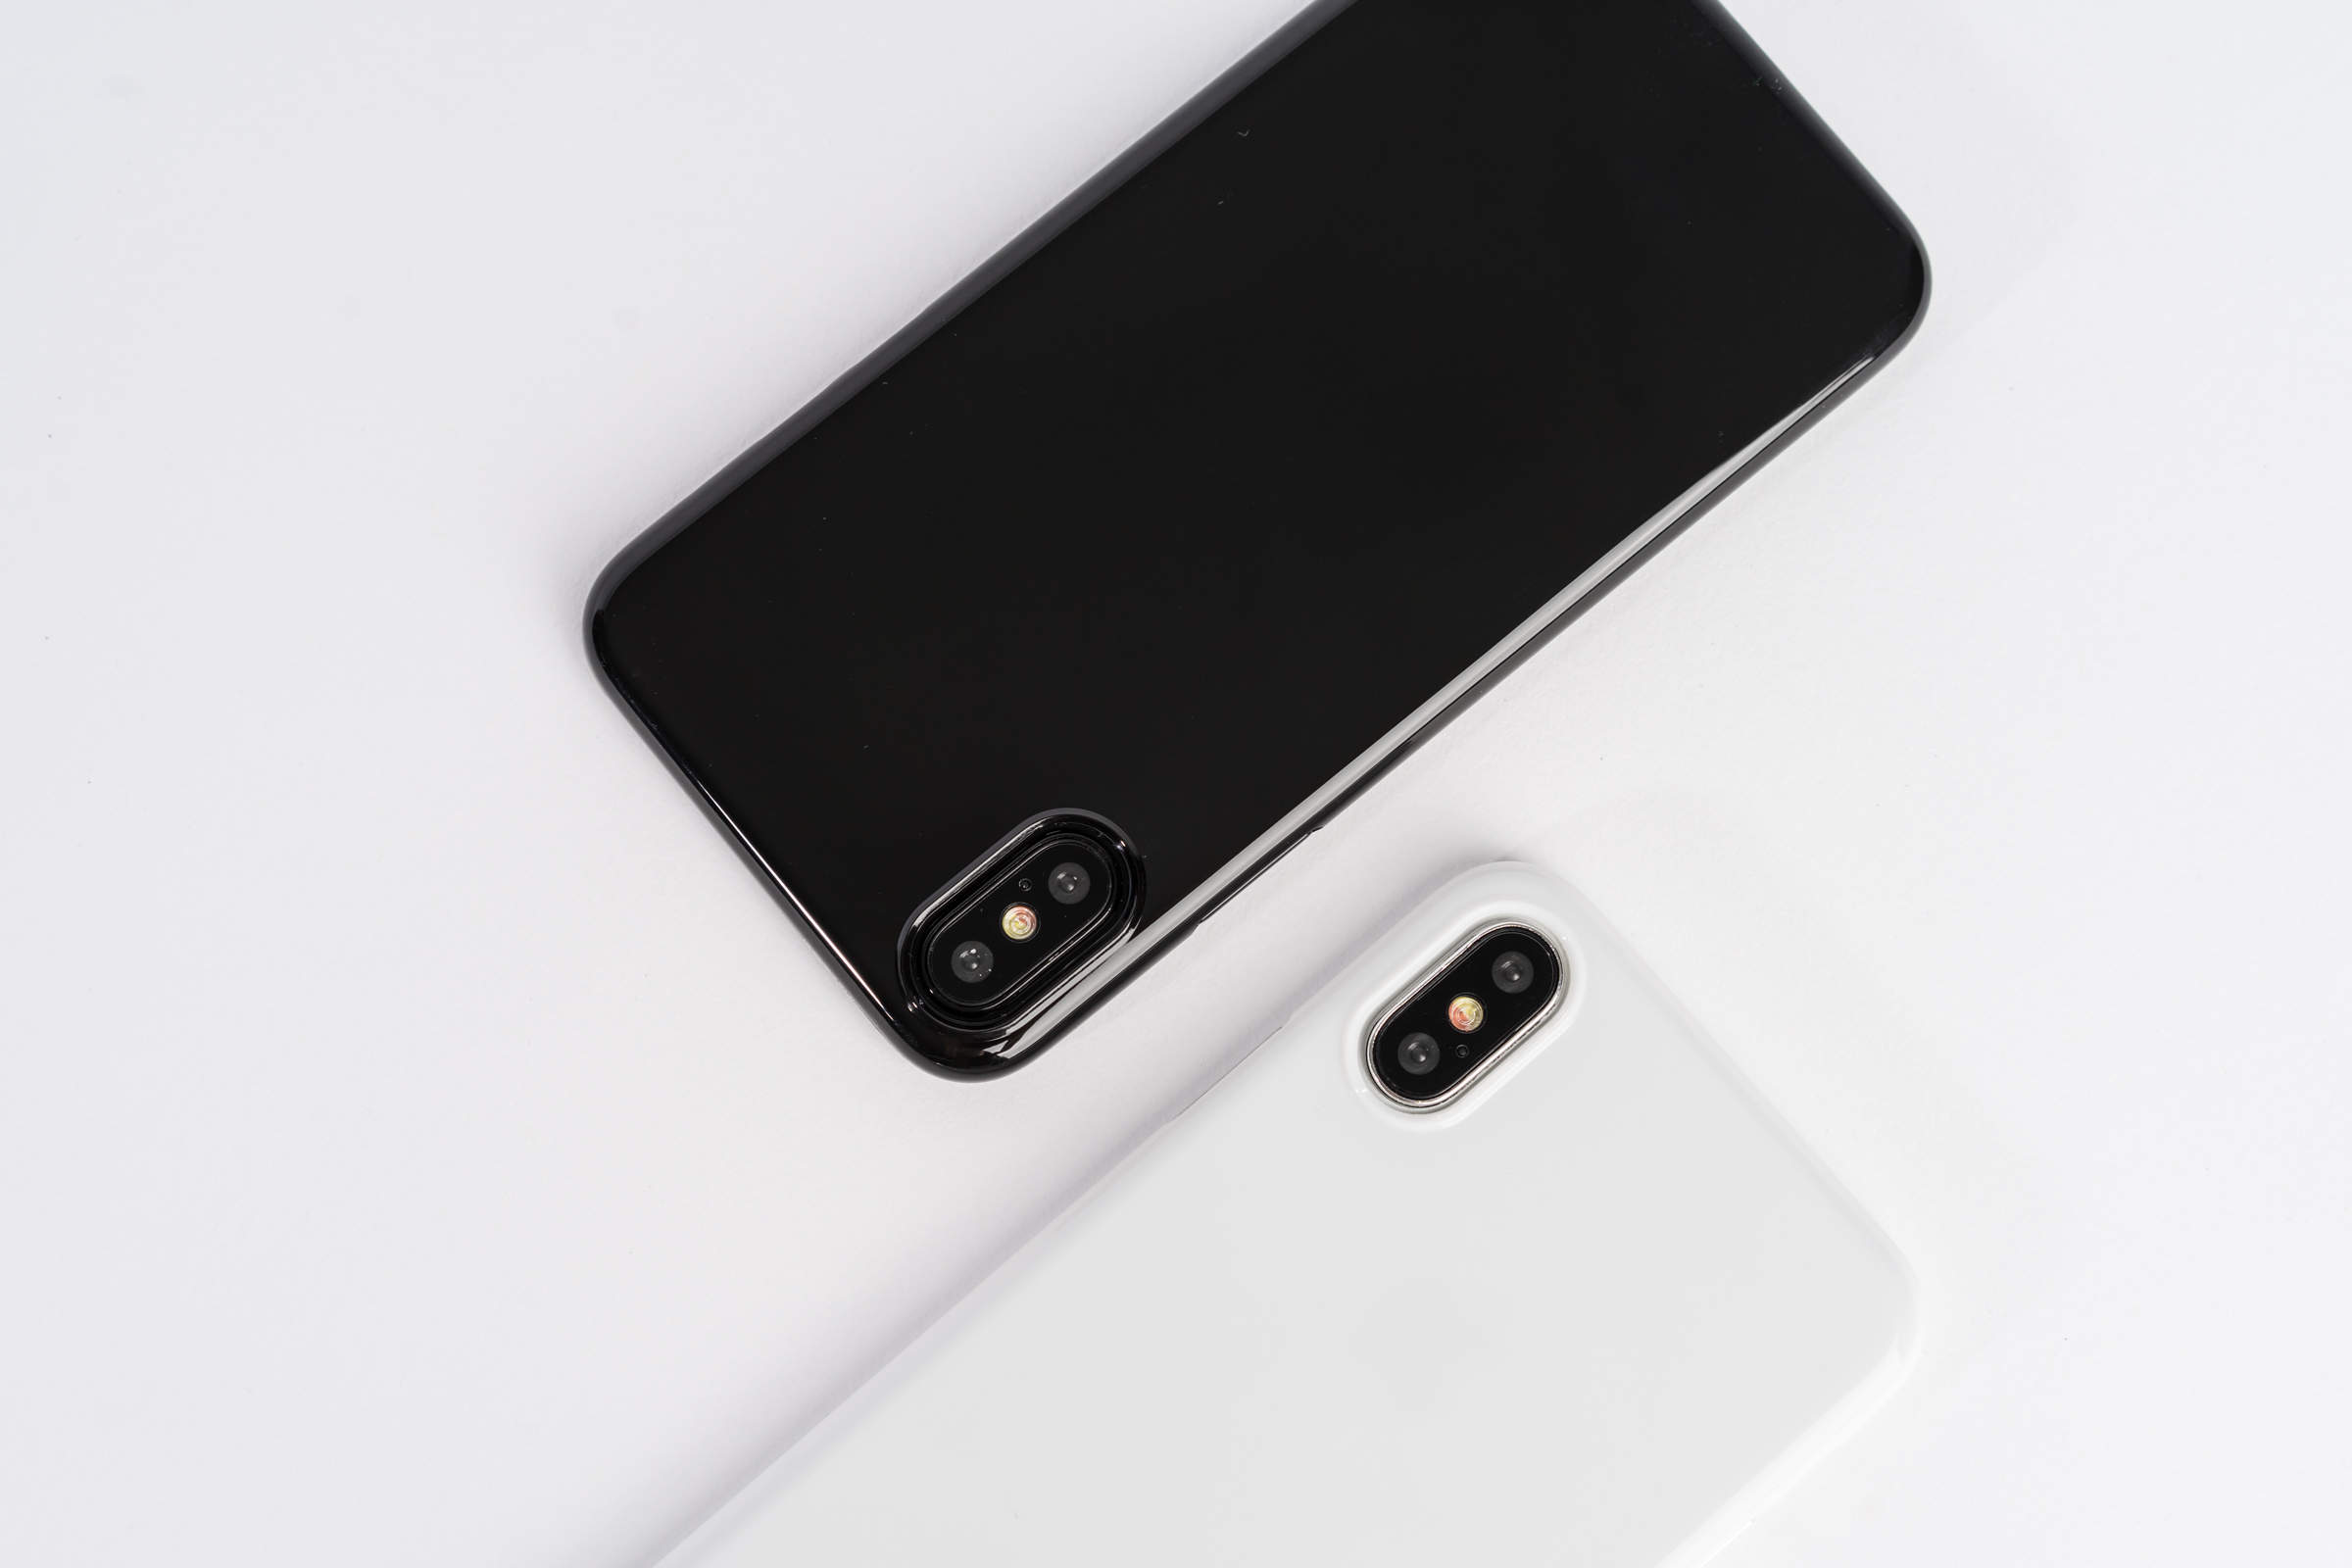 Jet Black and Jet White Peel Cases for iPhone X